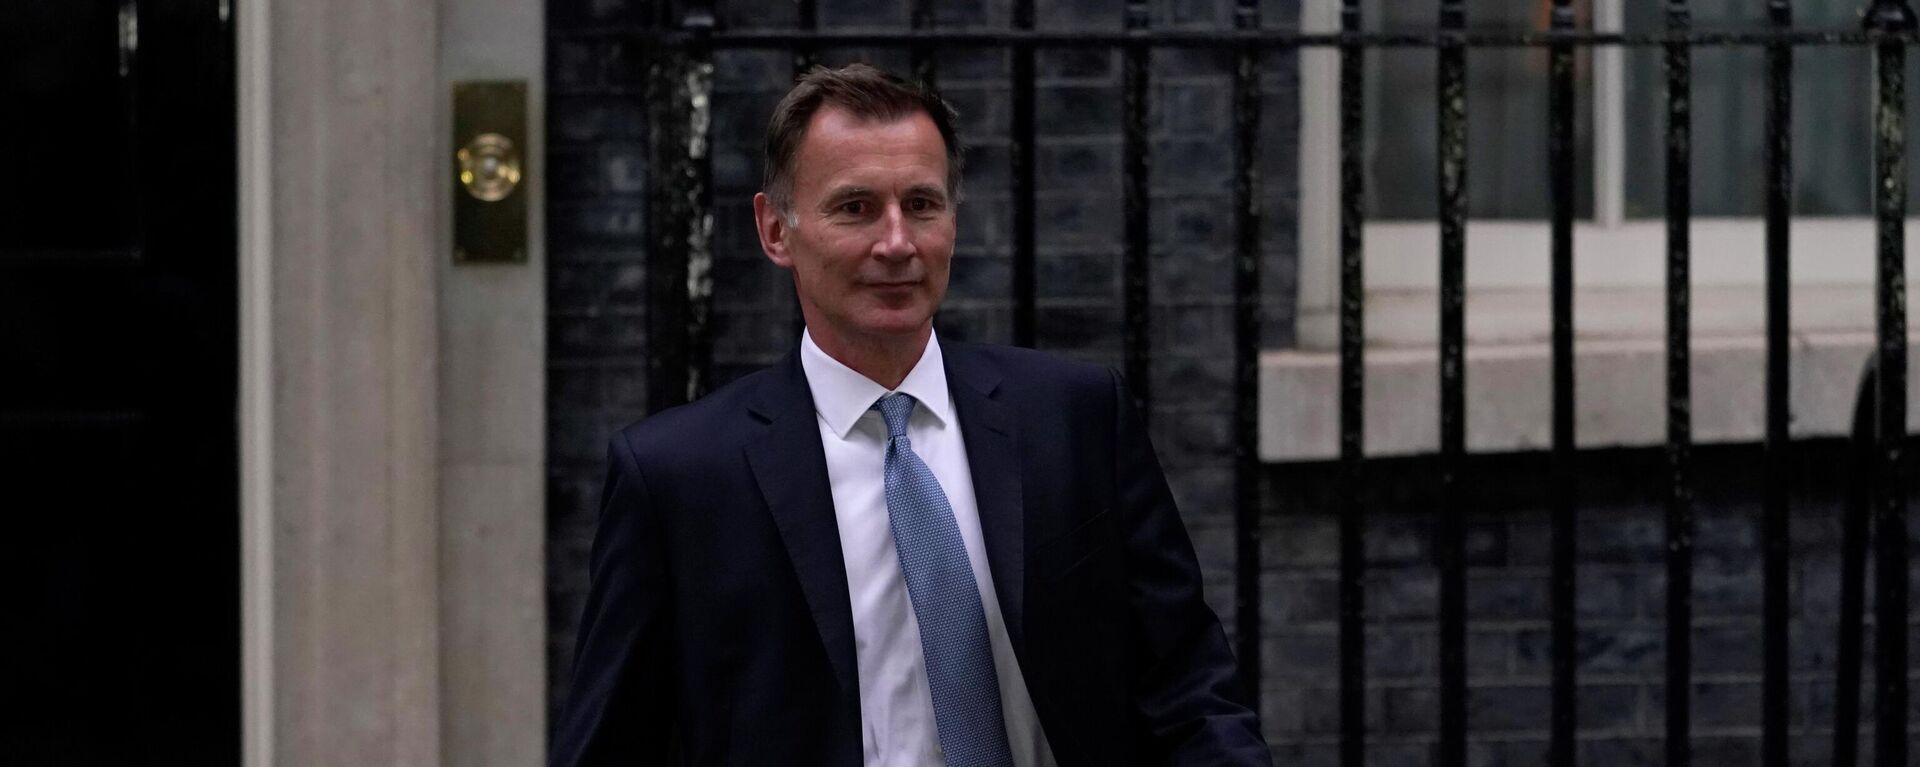 British Chancellor of the Exchequer Jeremy Hunt leaves 10 Downing Street after being appointed by Prime Minister Liz Truss - Sputnik International, 1920, 08.07.2023